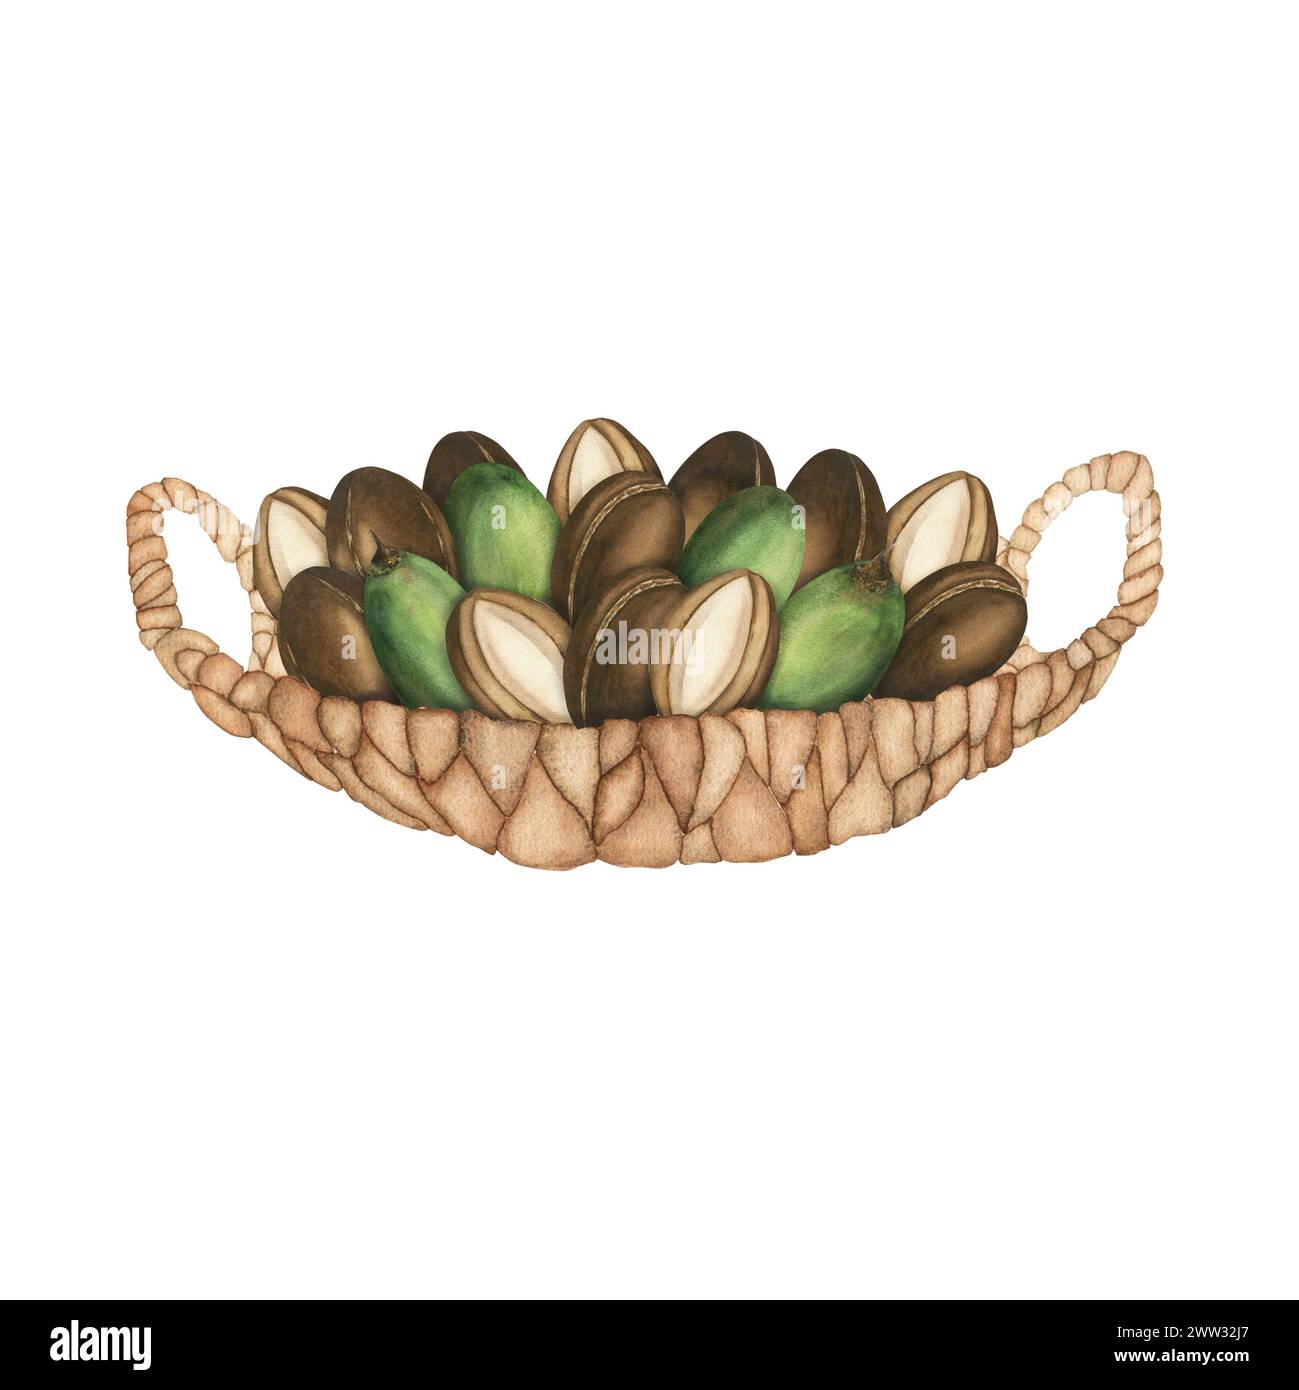 A wicker basket with ripe argan tree nuts. A watercolor-drawn illustration, a clipart on a white background. Argan oil, body and hair care, cosmetolog Stock Photo